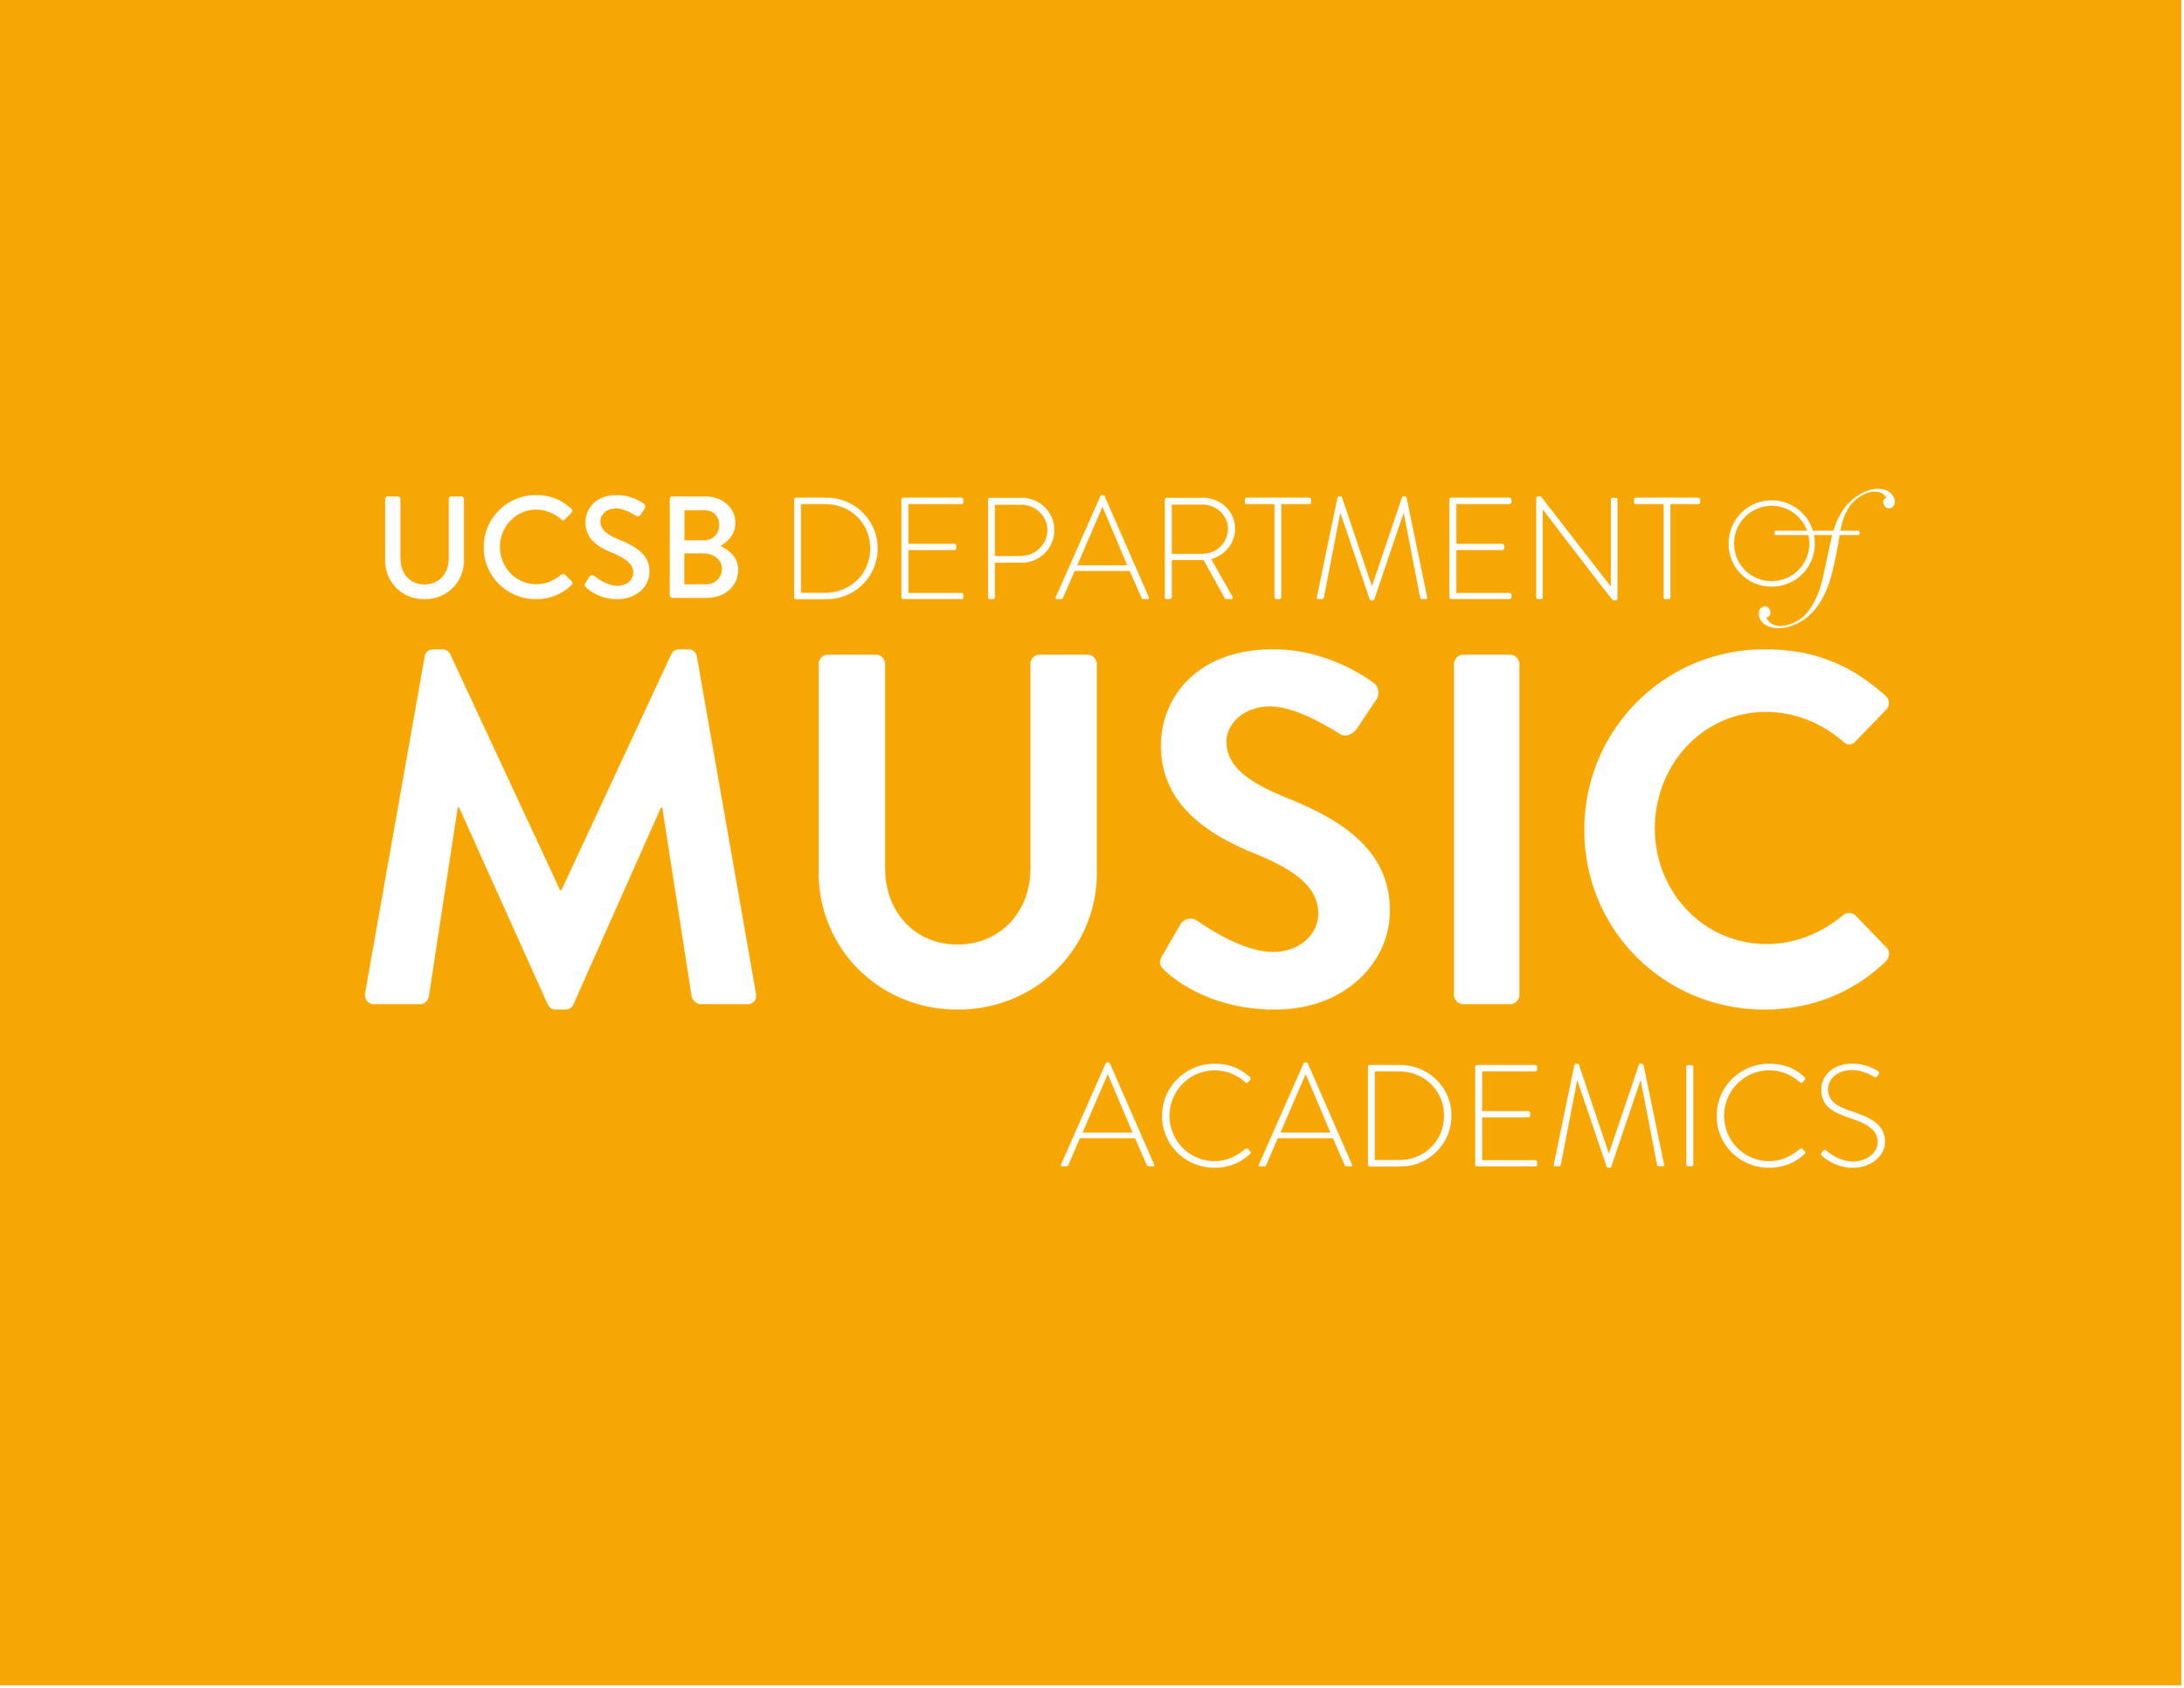 ucsb guidelines new logo and font use FINAL-23.png